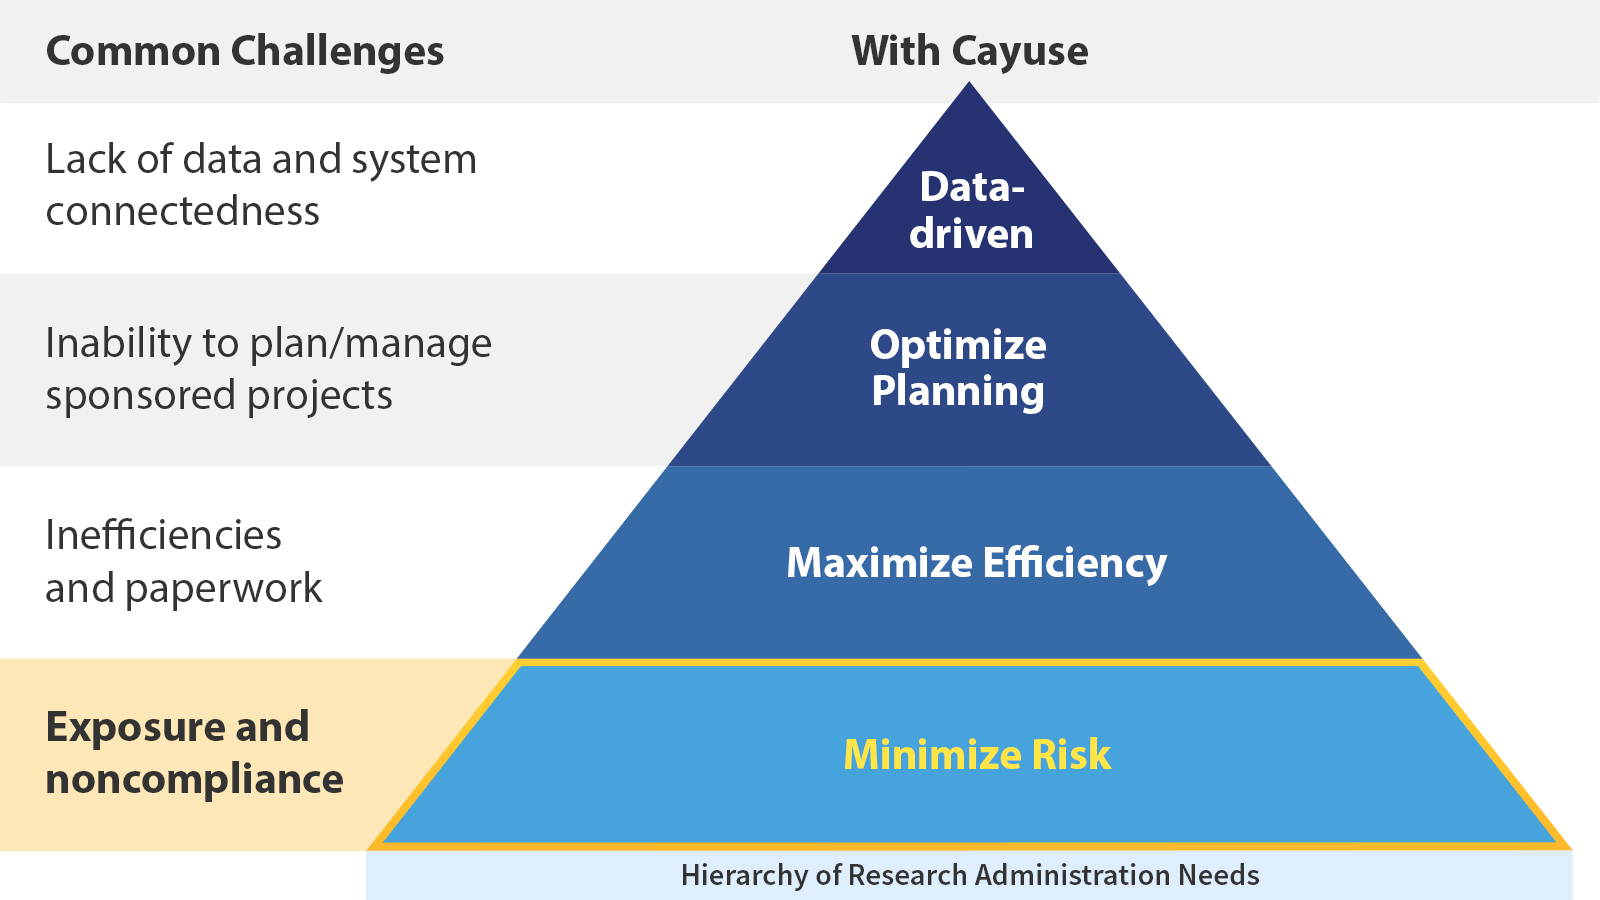 Hierarchy of Research Administration Needs: Minimize Risk